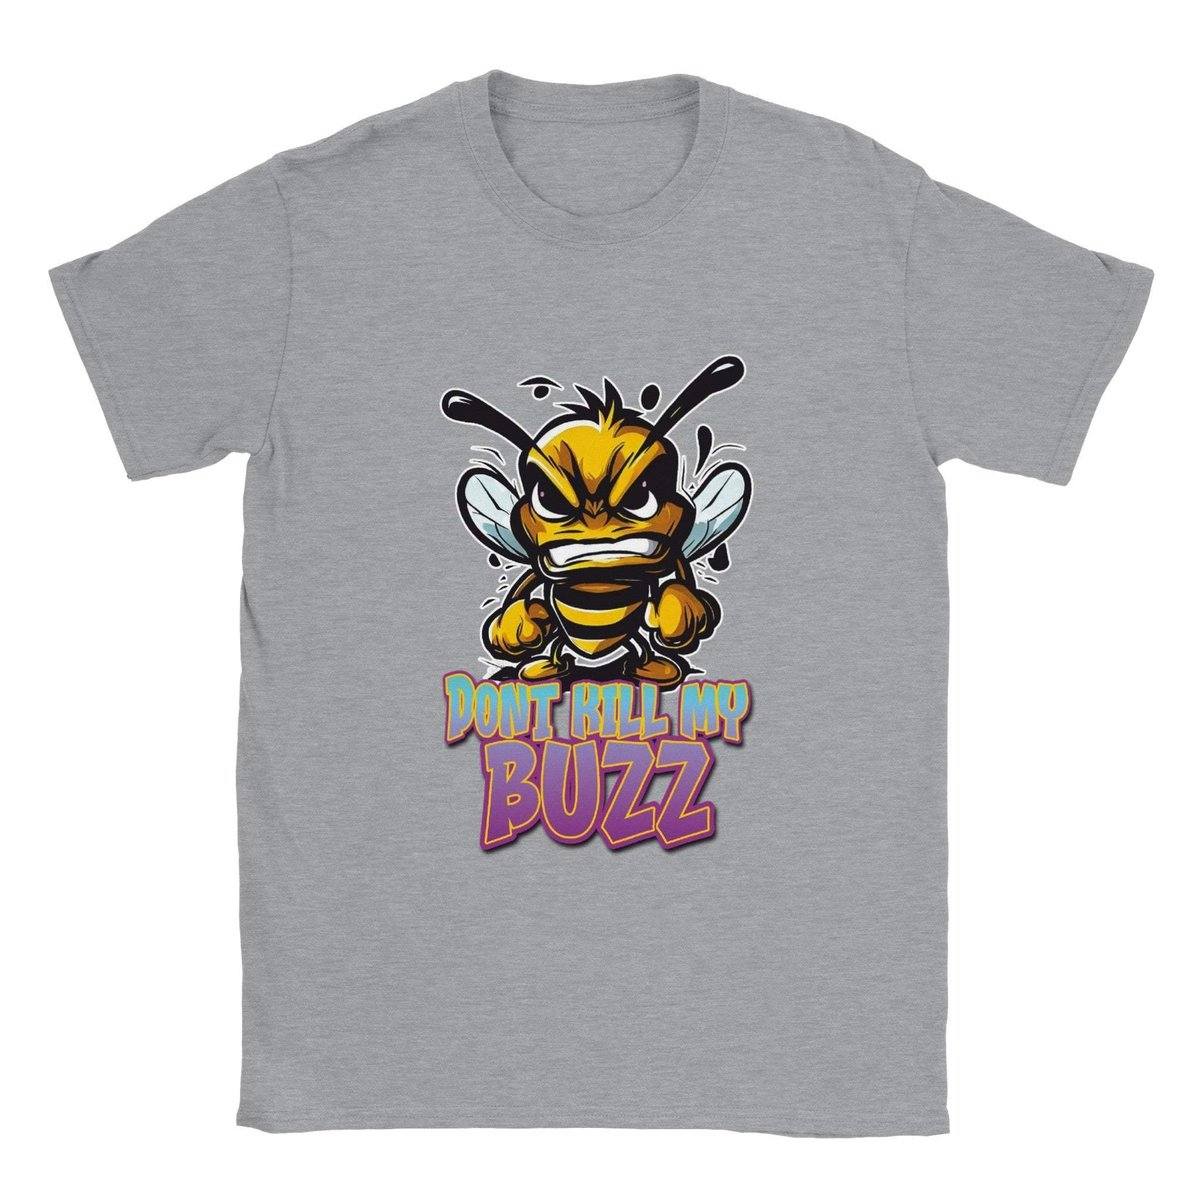 Dont Kill My Buzz - Angry Bee T-Shirt - Classic Unisex Crewneck T-shirt Australia Online Color